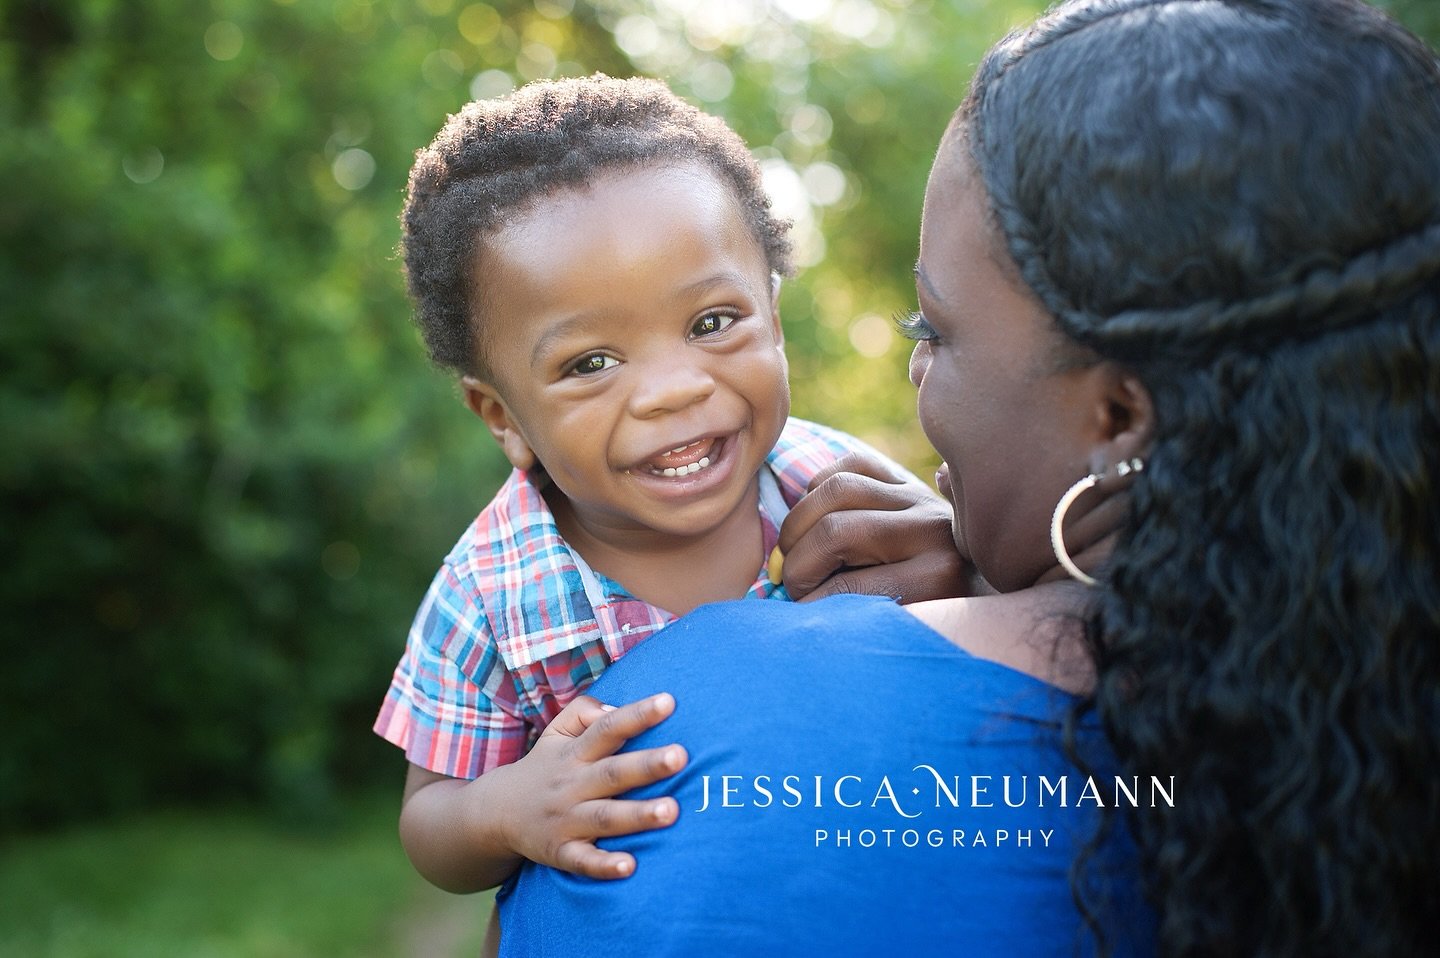 That sweet smile and those handsome eyes. This is one of my favorite poses for a youngster with their mom or dad. It&rsquo;s fun, a little unexpected for the child, which makes for beautiful candid smiles. 

If you&rsquo;re interested in booking a se